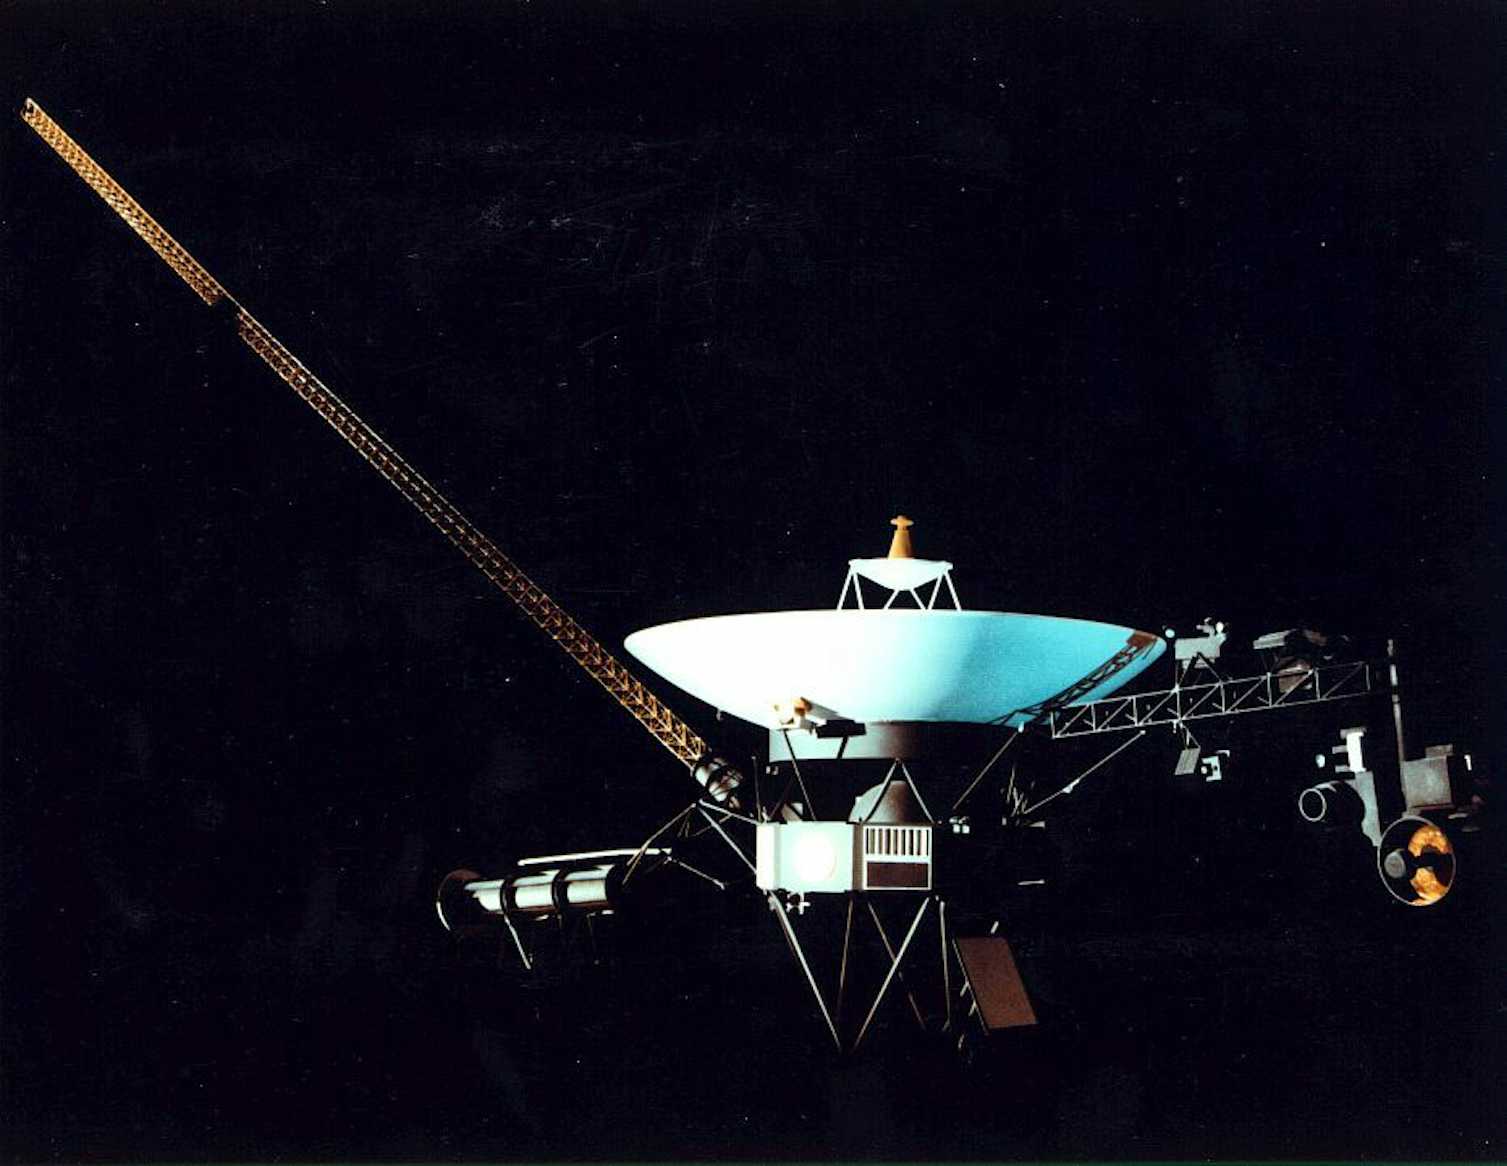 voyager 2 view